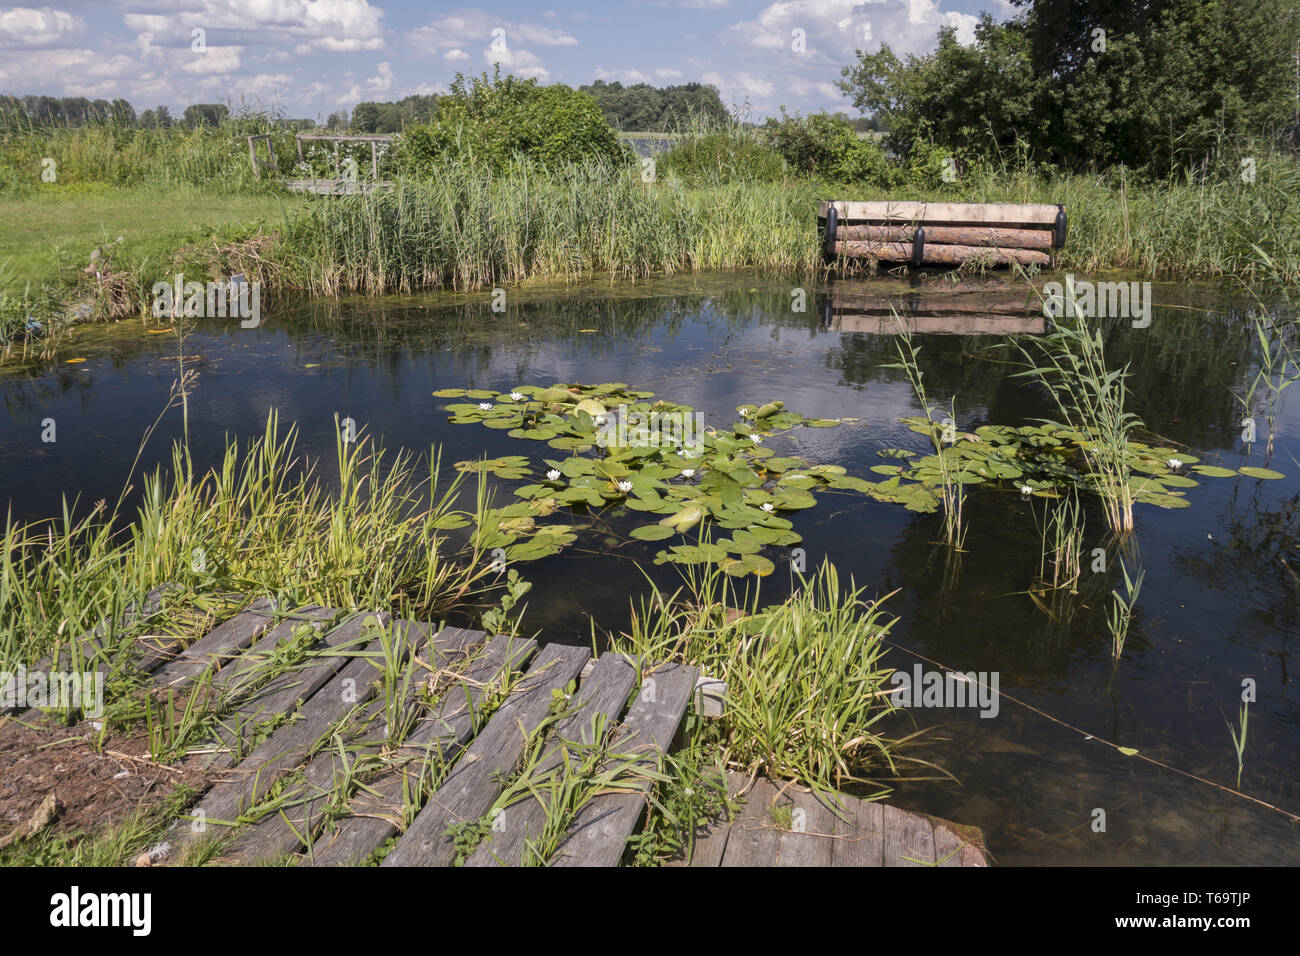 Pond with water lilies Stock Photo